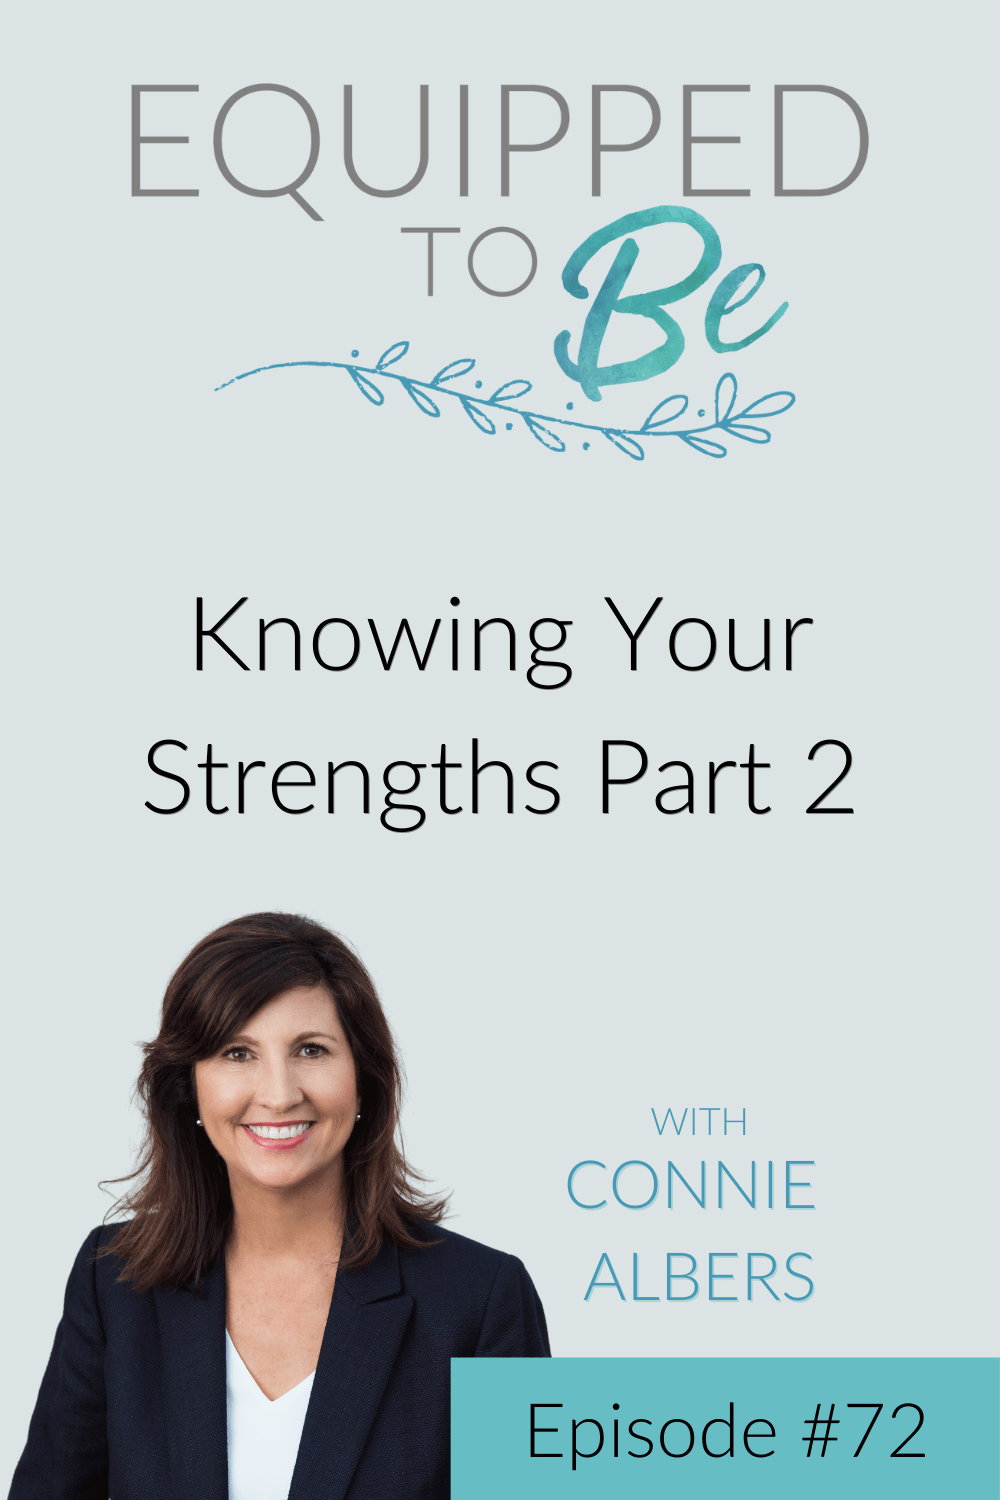 Knowing Your Strengths Part 2 - ETB #72